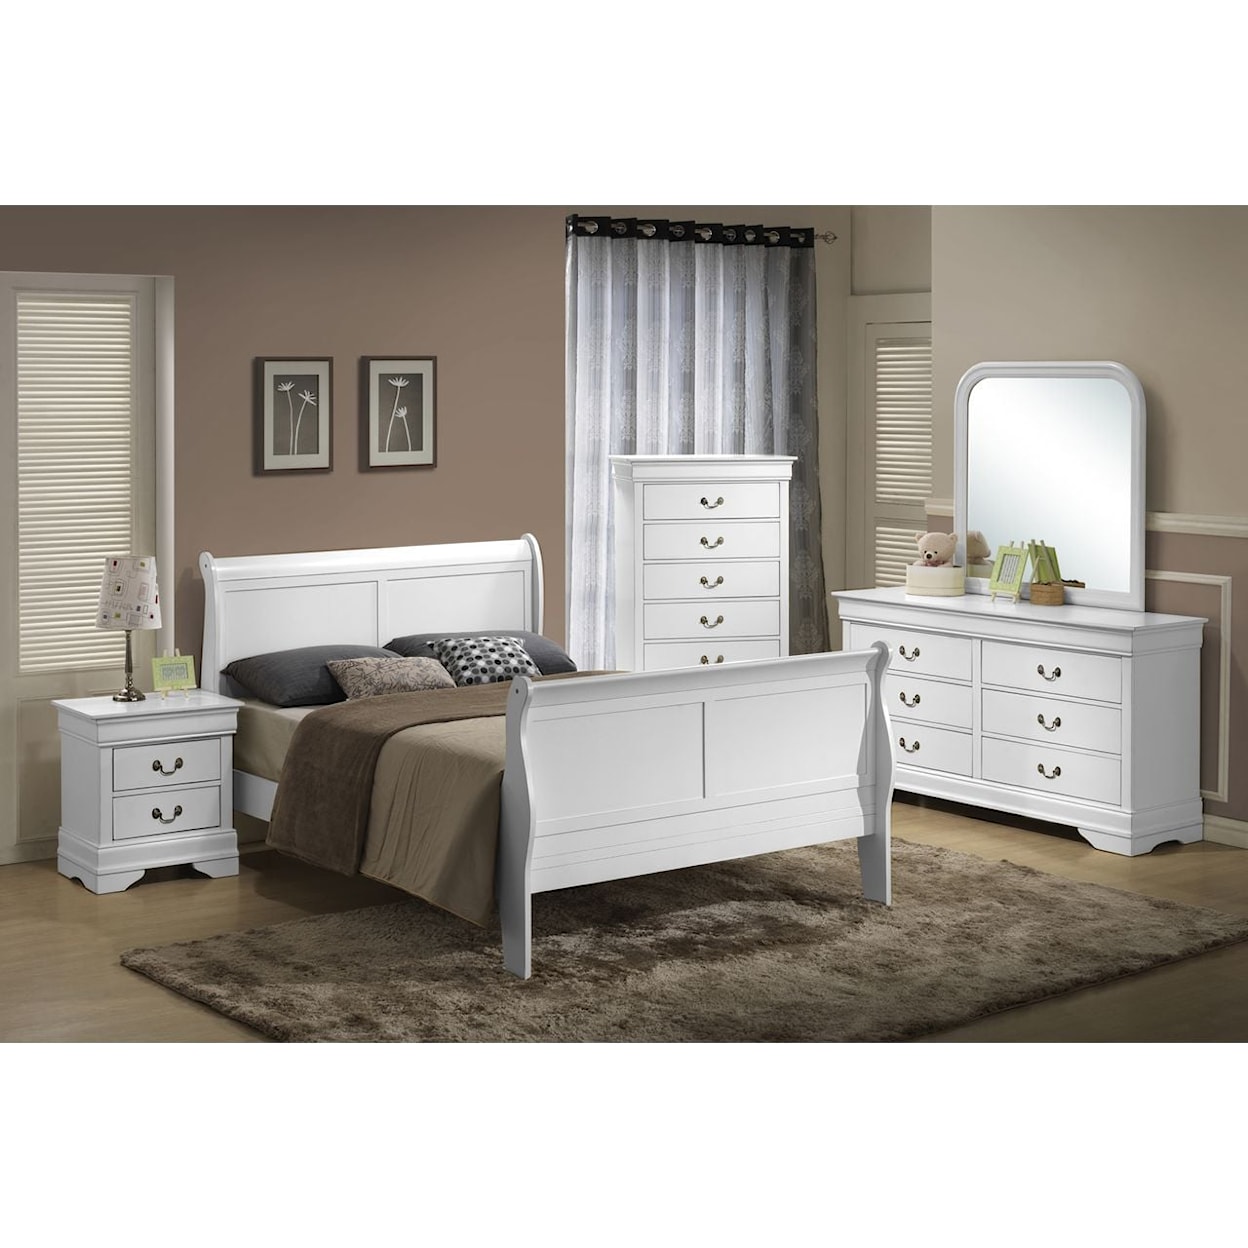 Lifestyle C4936A 5 Piece Twin Bedroom Set